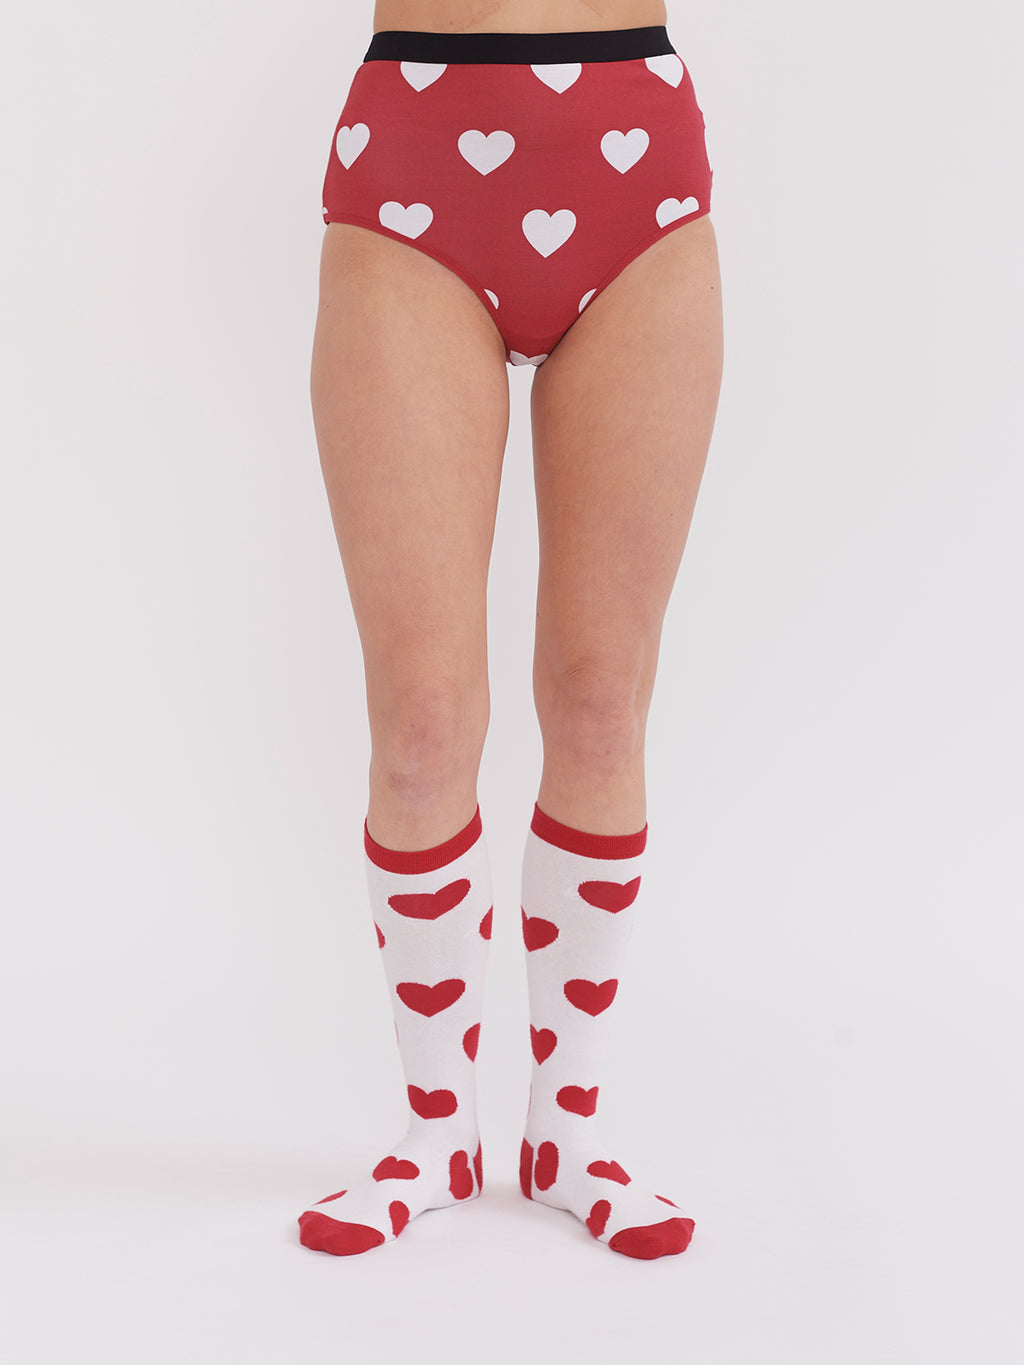 Lazy Oaf Hearts and Smiles Knicker Set